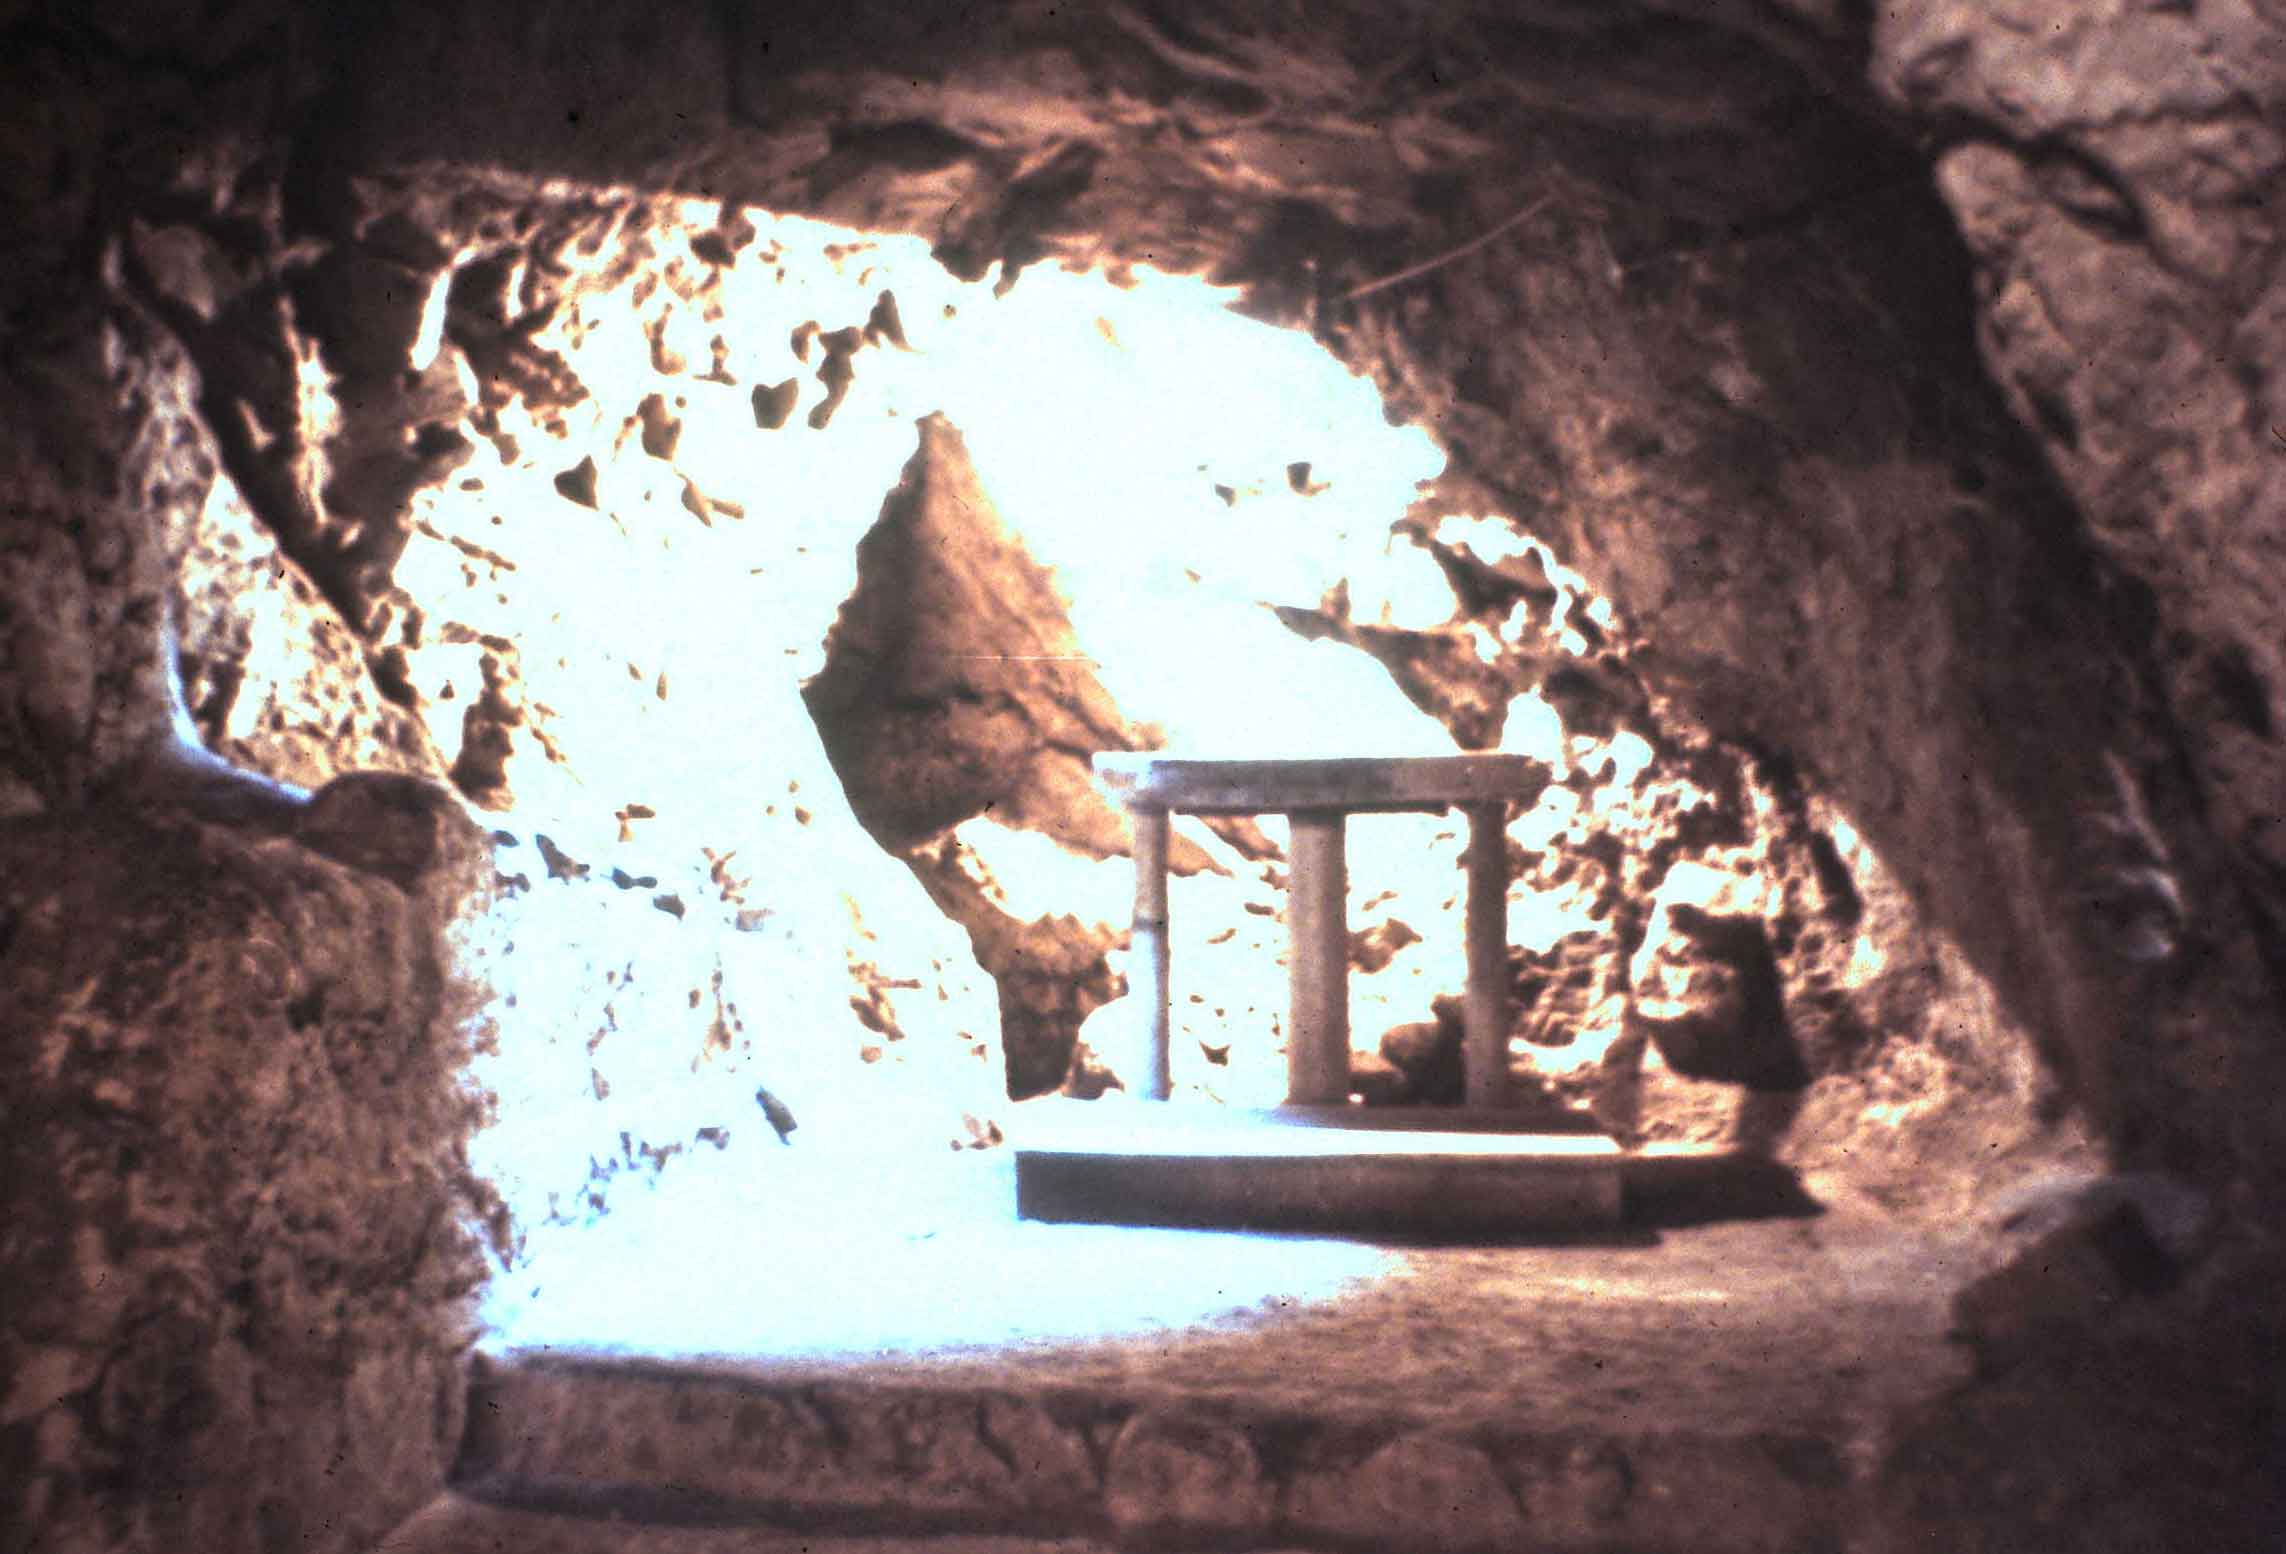 Grotto of the Holy Family